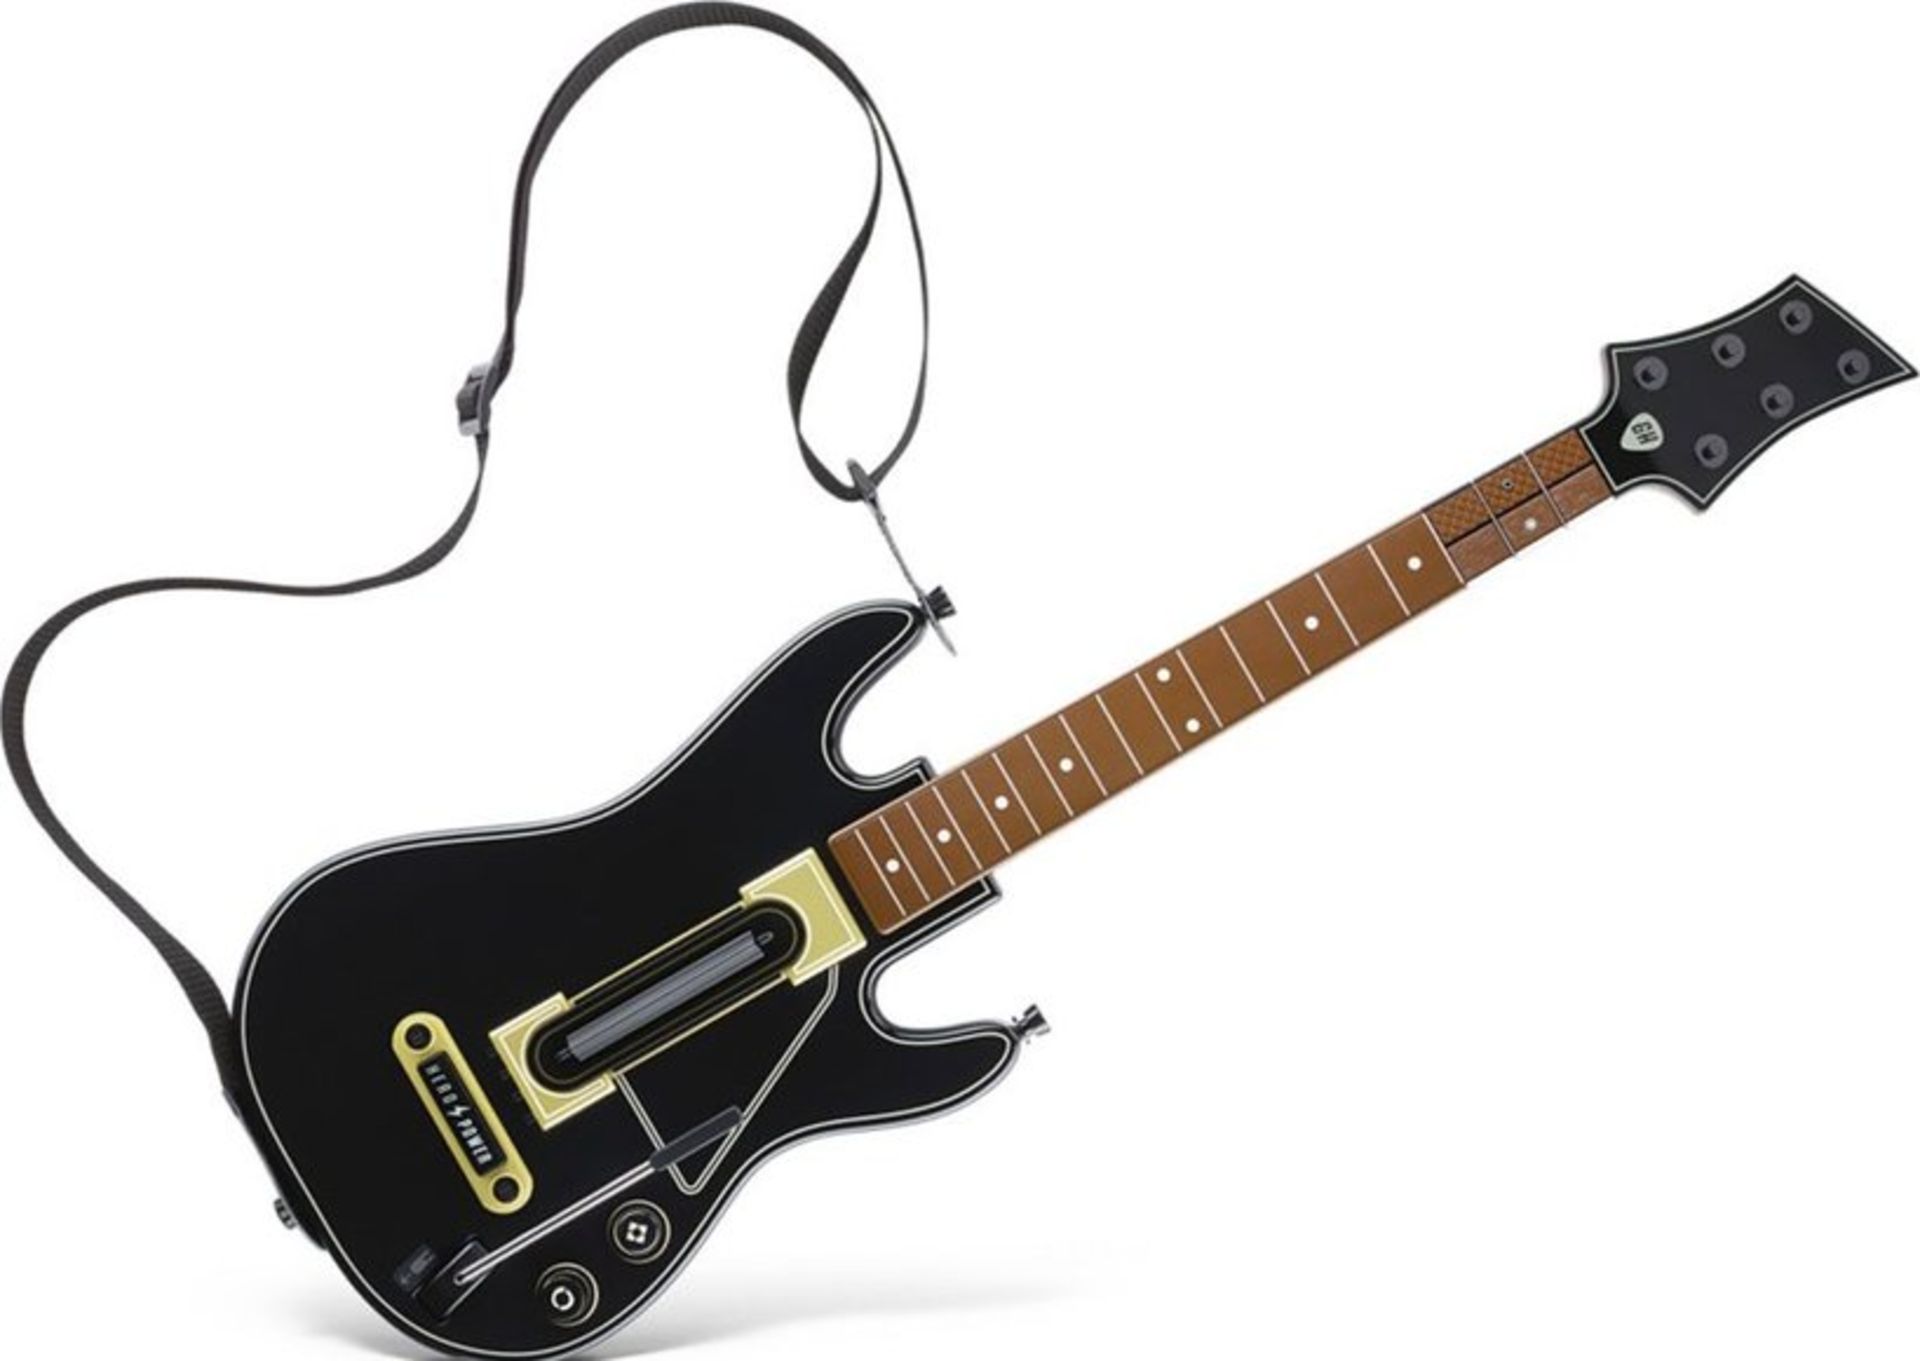 + VAT Brand New Guitar Hero Live For iPhone iPad And iPod Touch Includes Video Game/Guitar - Image 2 of 2